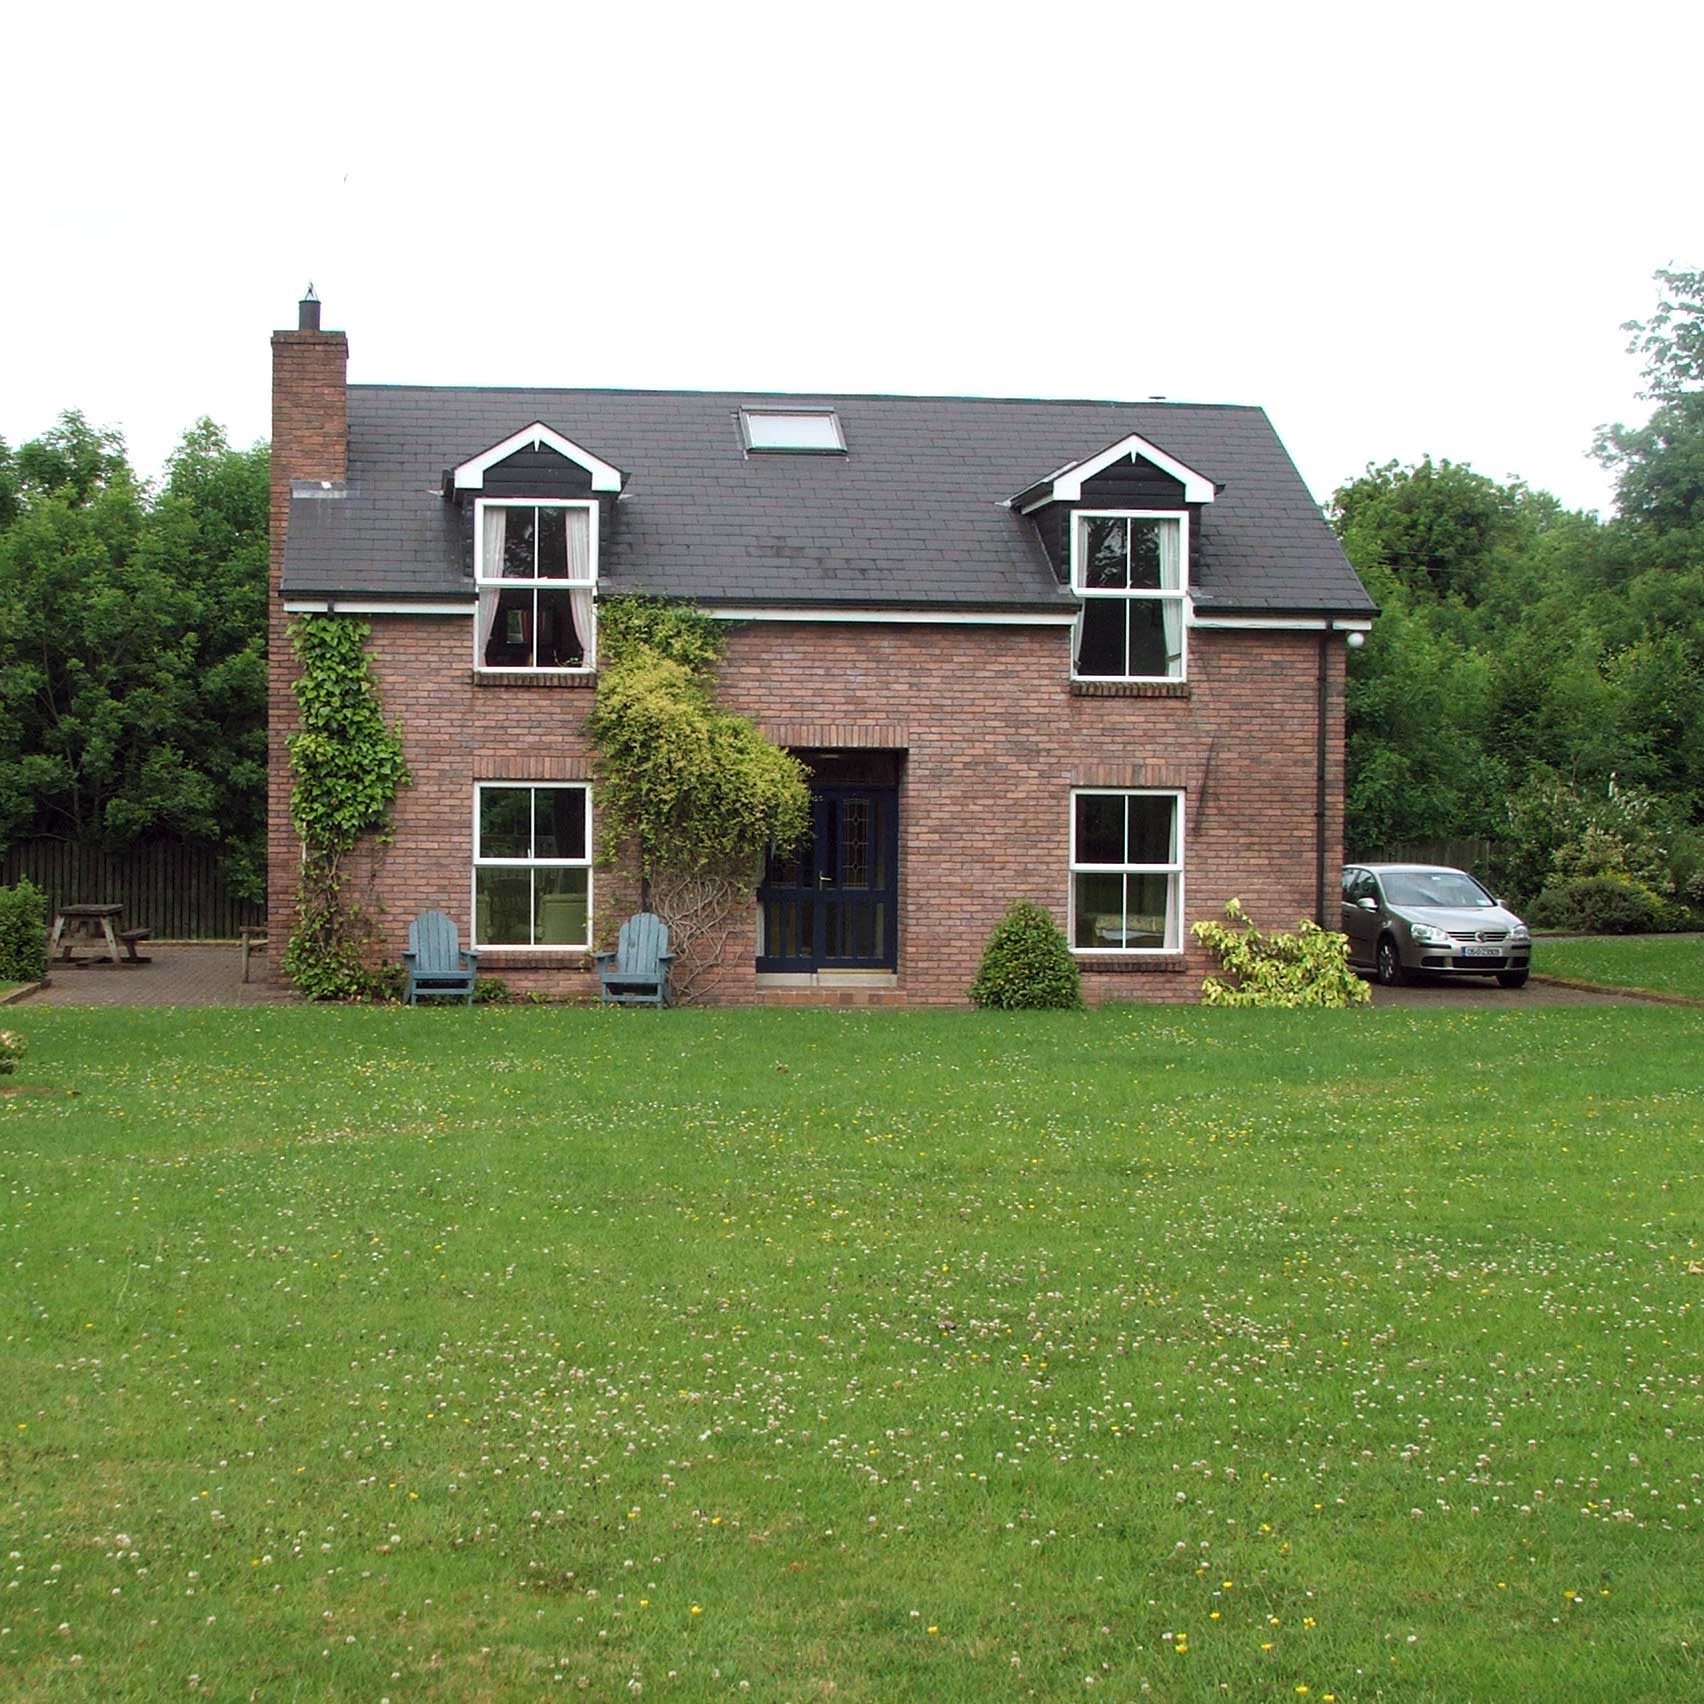 Cygnet Lodge | Self Catering Holiday Rental Accommodation close to Lough Erne in Co Fermanagh